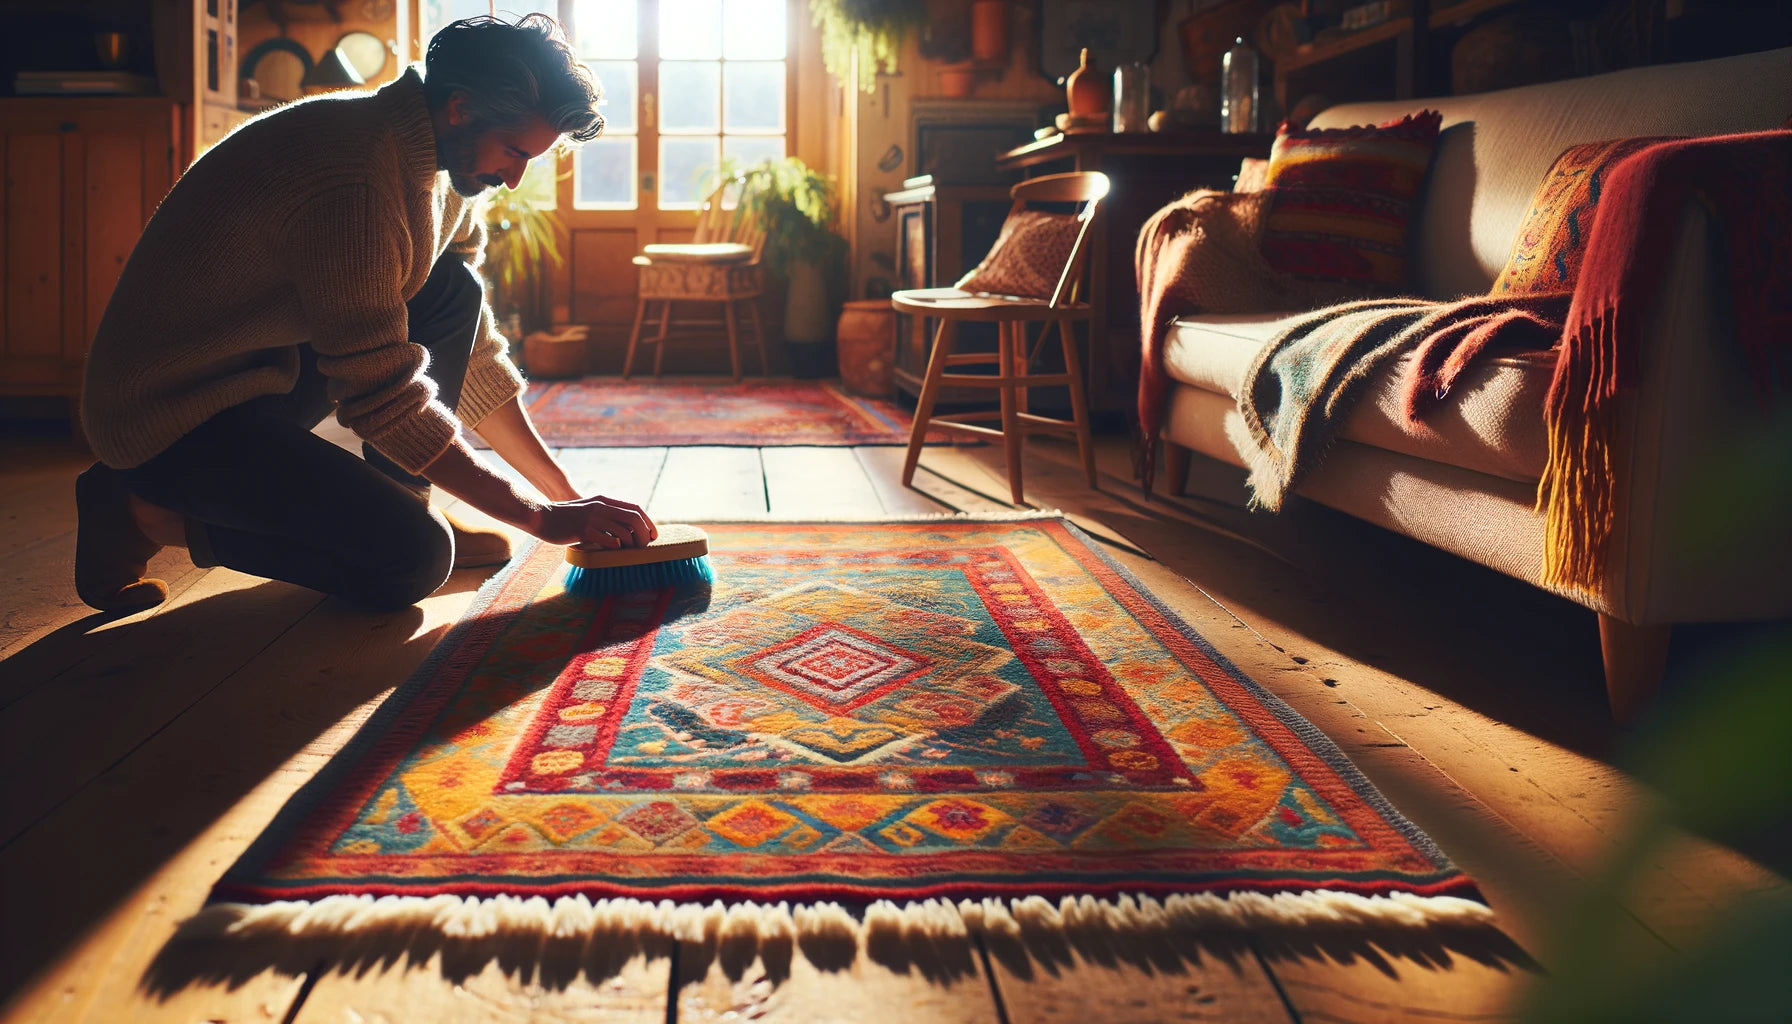 DALL·E 2024-02-28 15.40.36 - An indoor scene showcasing a person cleaning a small, woolen rug with care. The rug is laid out on the wooden floor of a brightly lit room, vibrant an.webp__PID:57642a09-8349-4320-b1f1-46e9239176bd